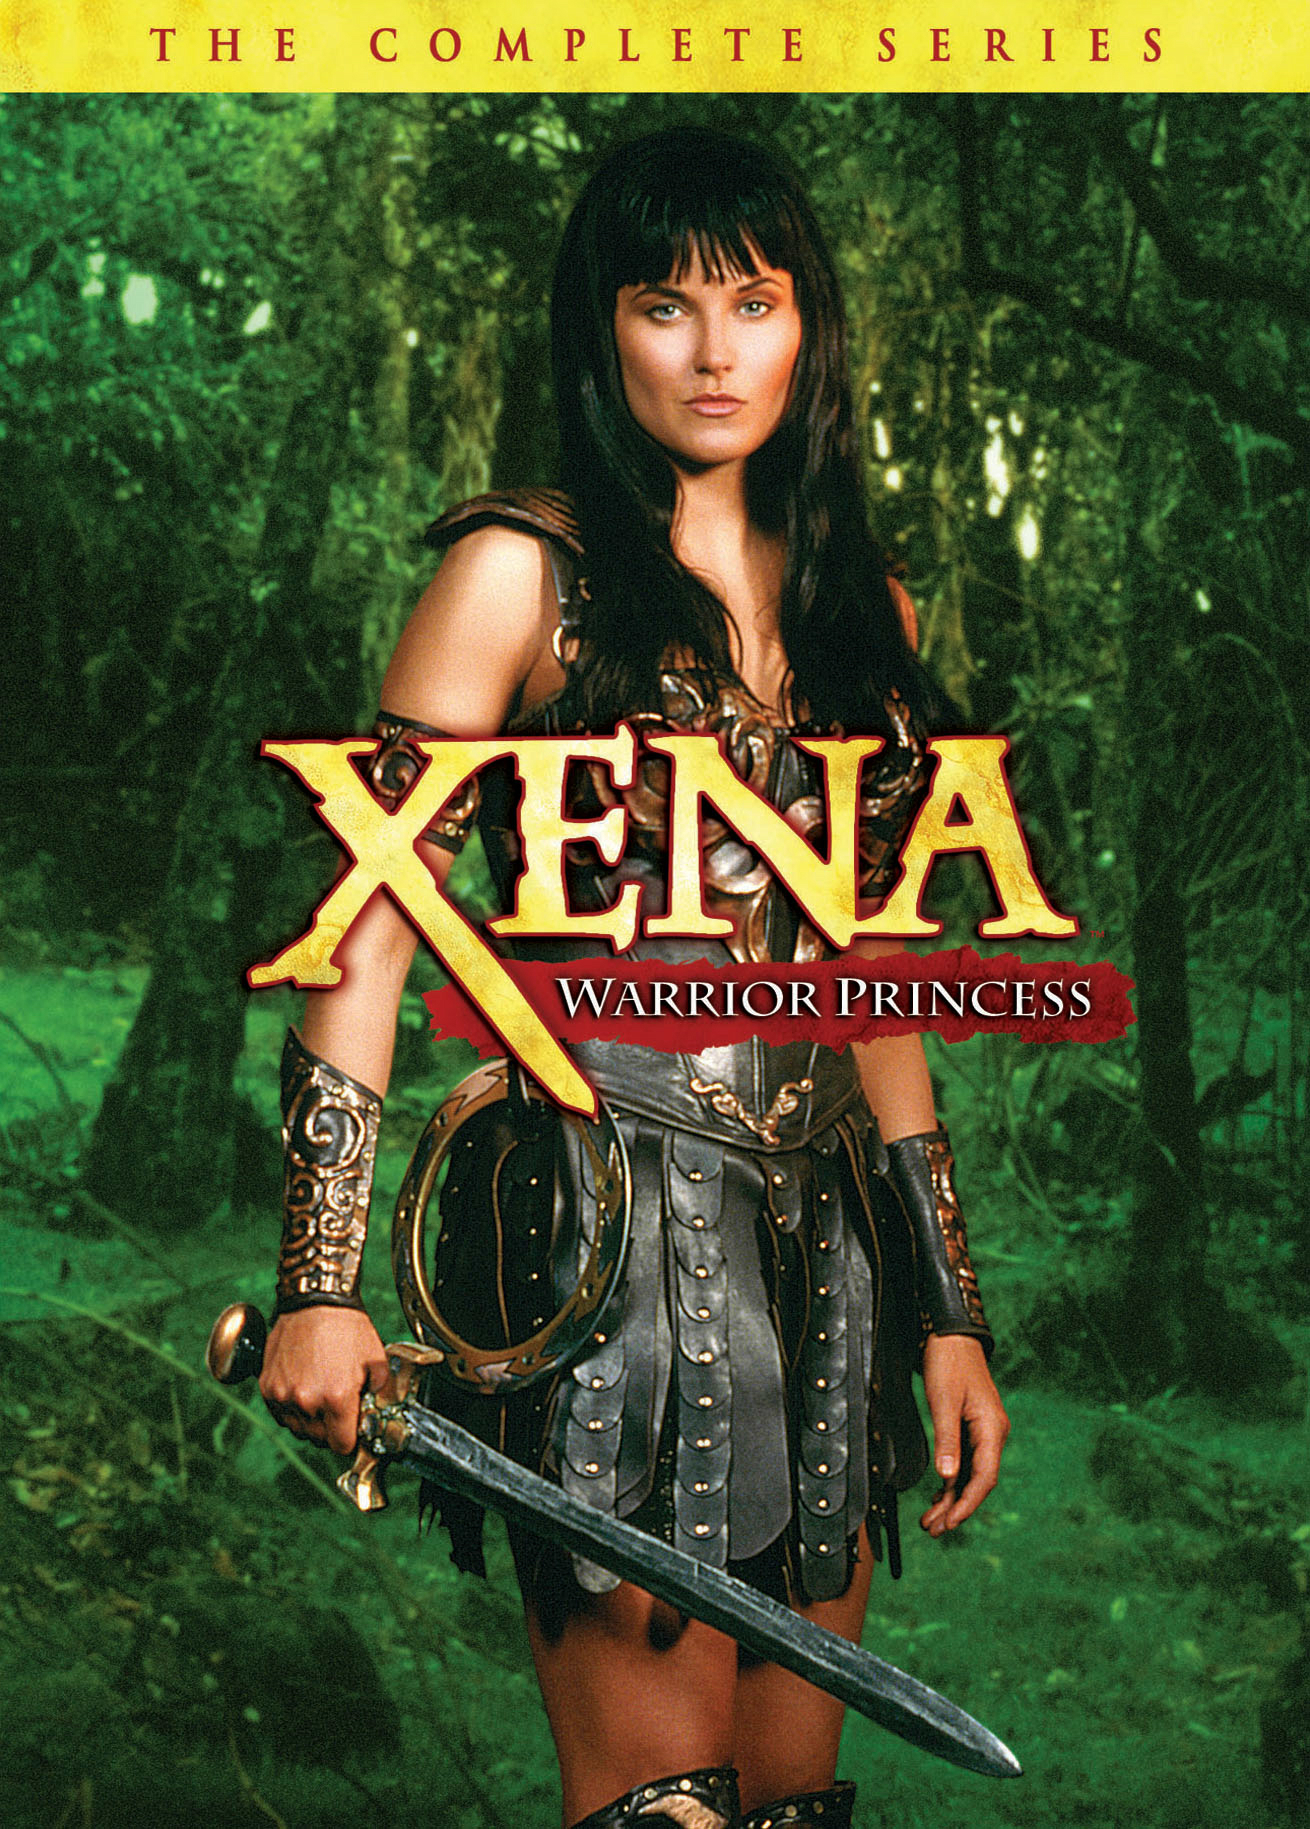 Xena: Warrior Princess - The Complete Series - DVD [ 2001 ]  - Sci Fi Television On DVD - TV Shows On GRUV